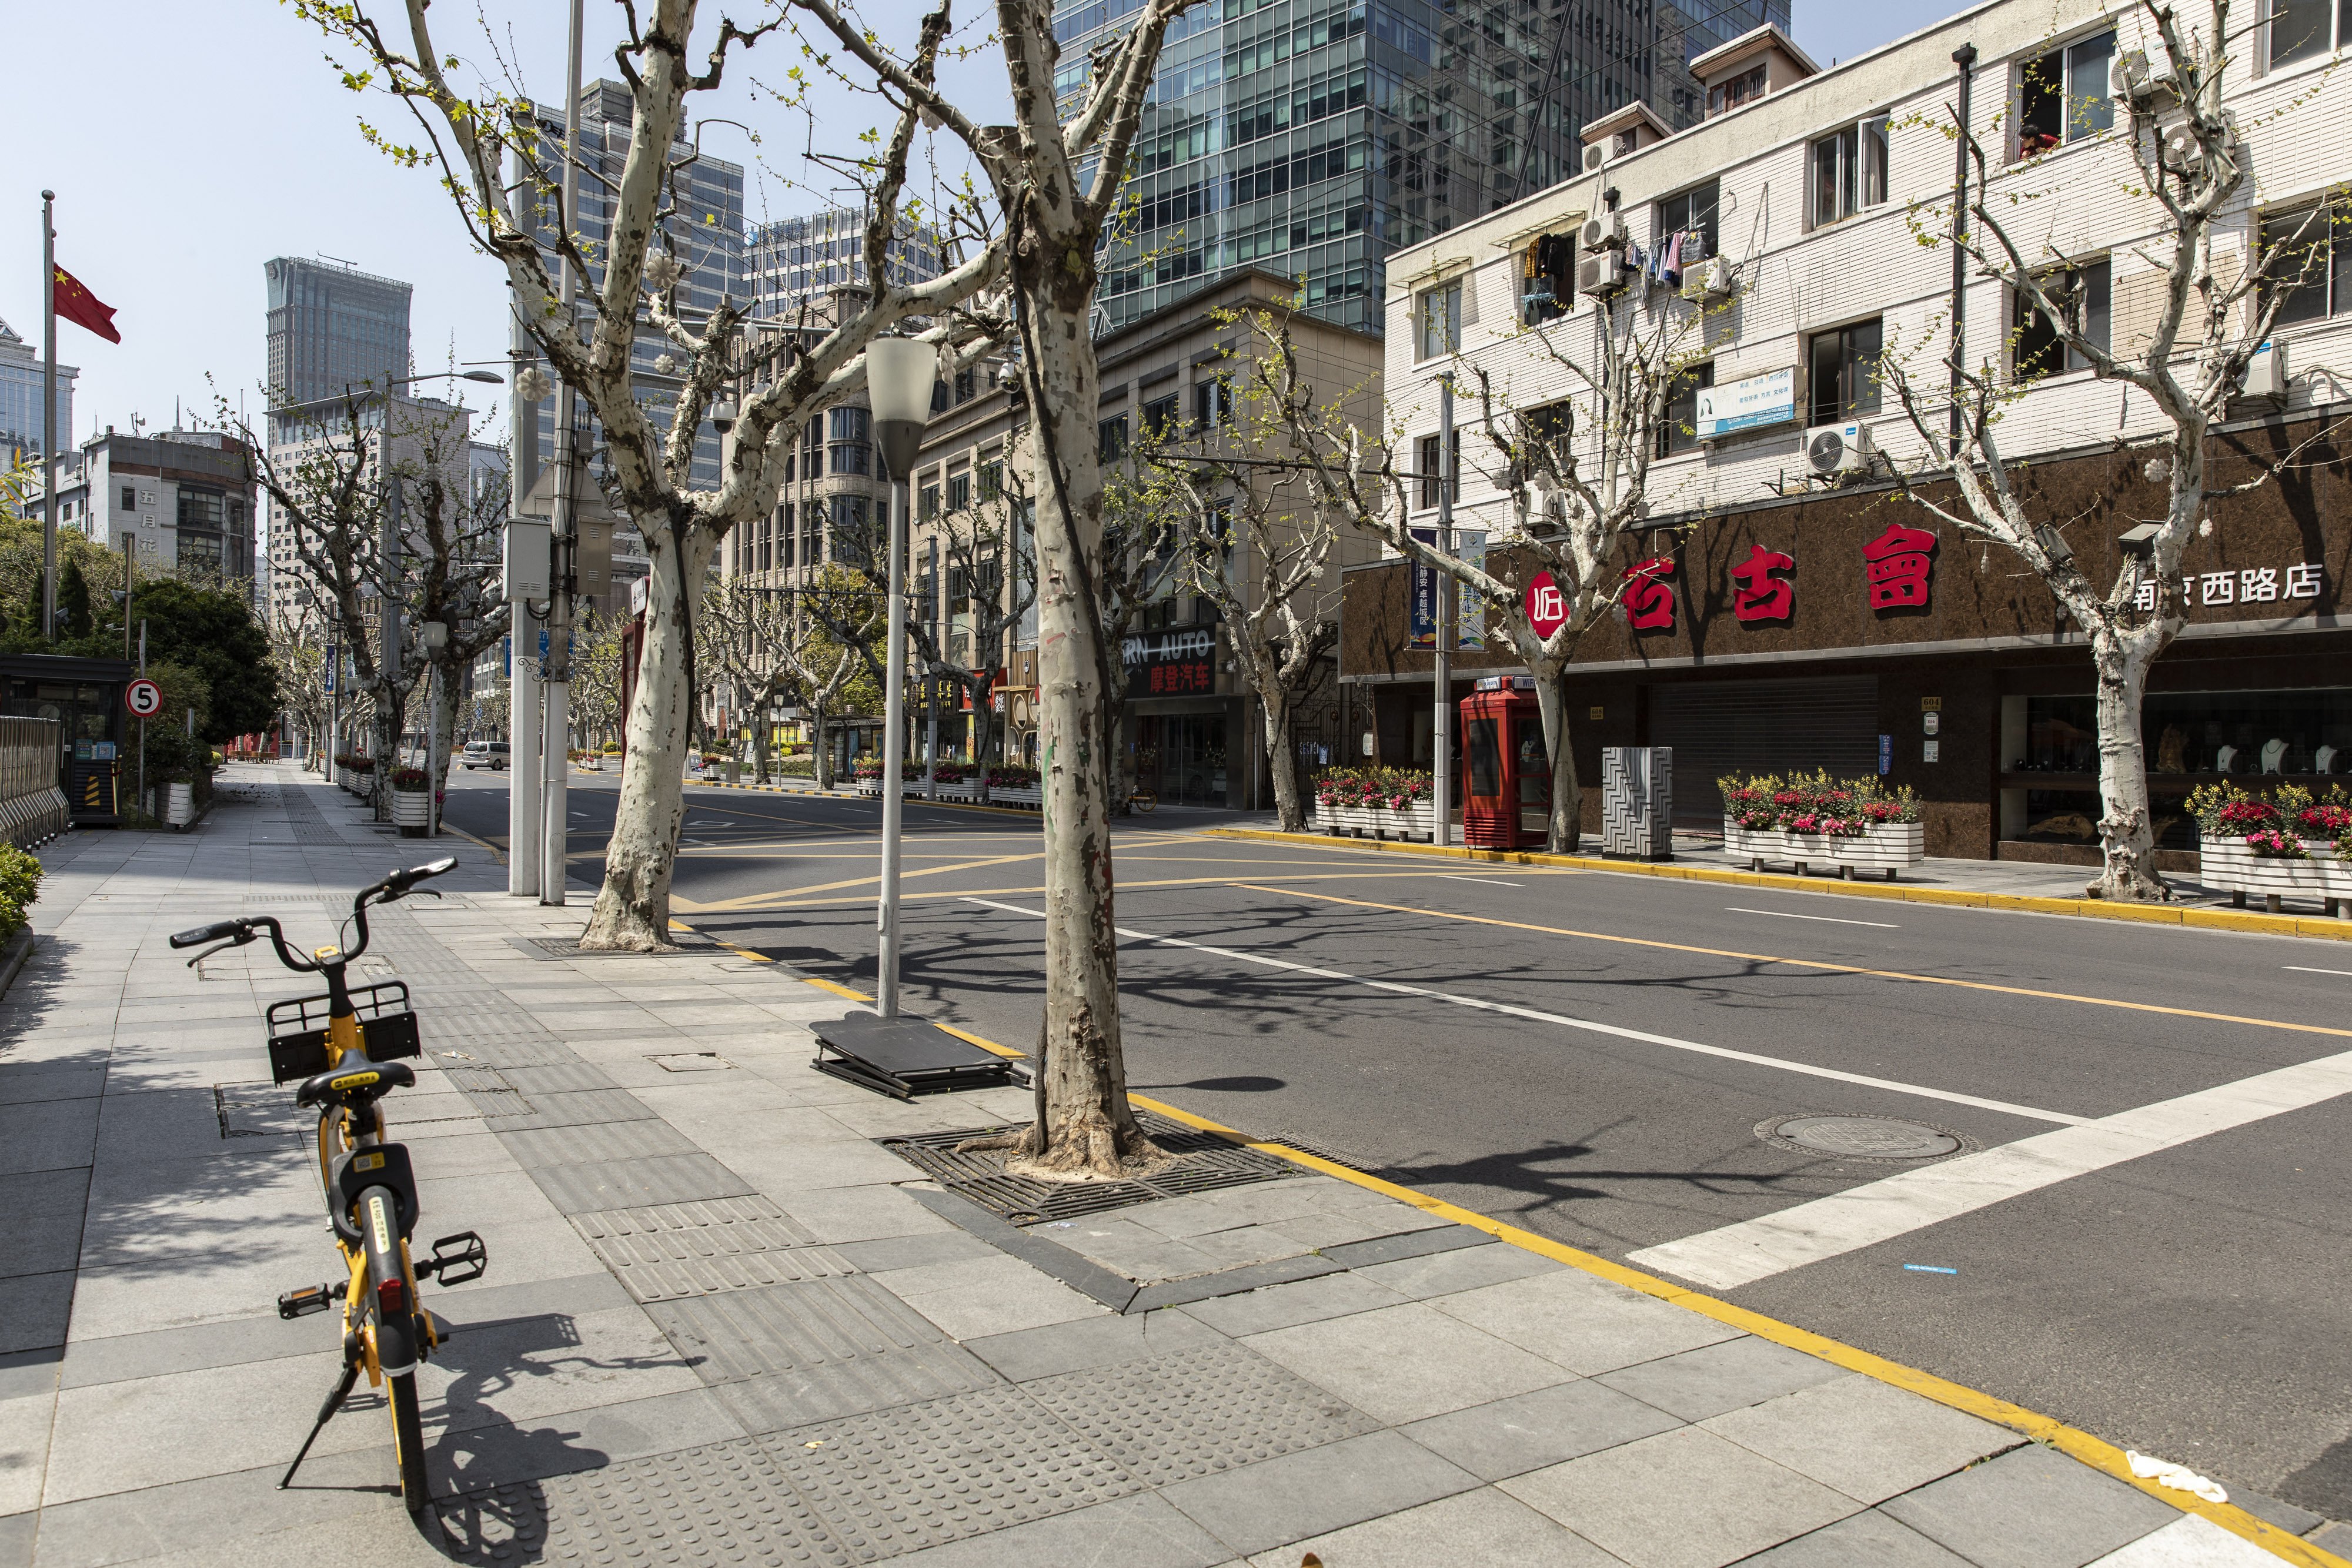 A deserted street in Shanghai on April 9. The Shanghai government has announced tweaks to its lockdown policy, yet overall measures remained stringent as residents living in communities with Covid-19 cases in the past seven days are barred from leaving their homes. Photo: Bloomberg